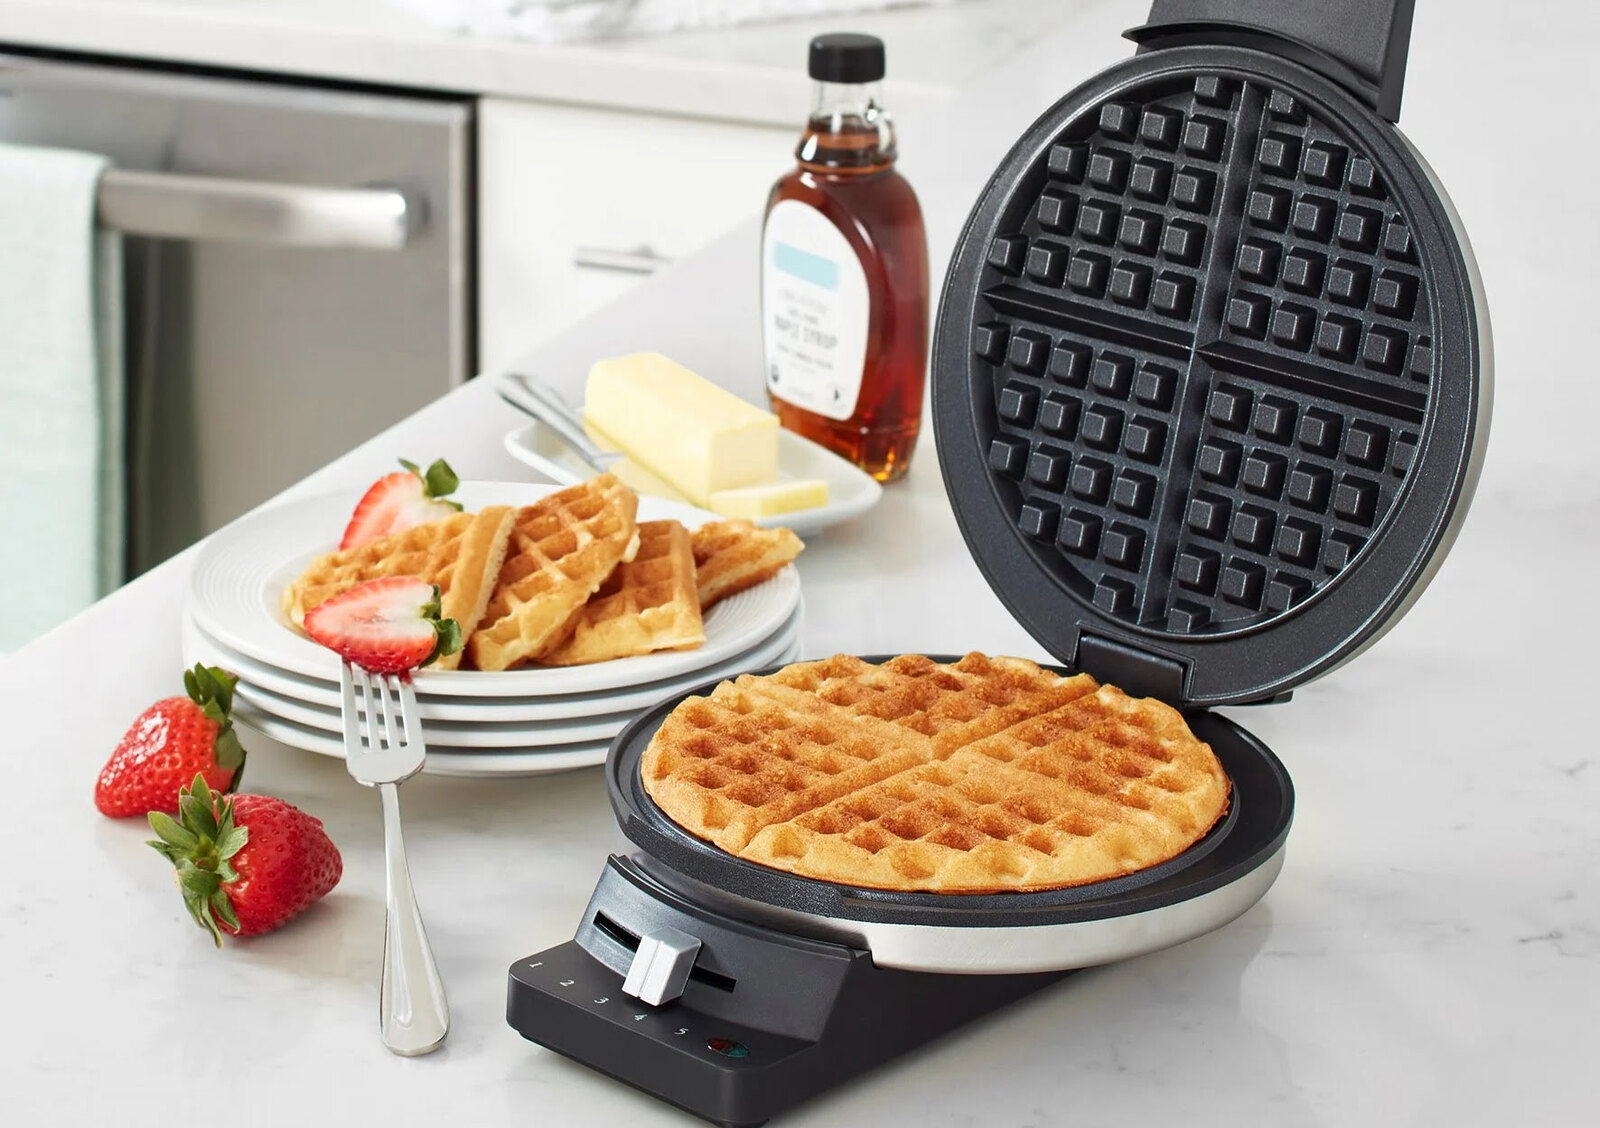 What Temp For Waffles In Cuisinart Waffle Iron